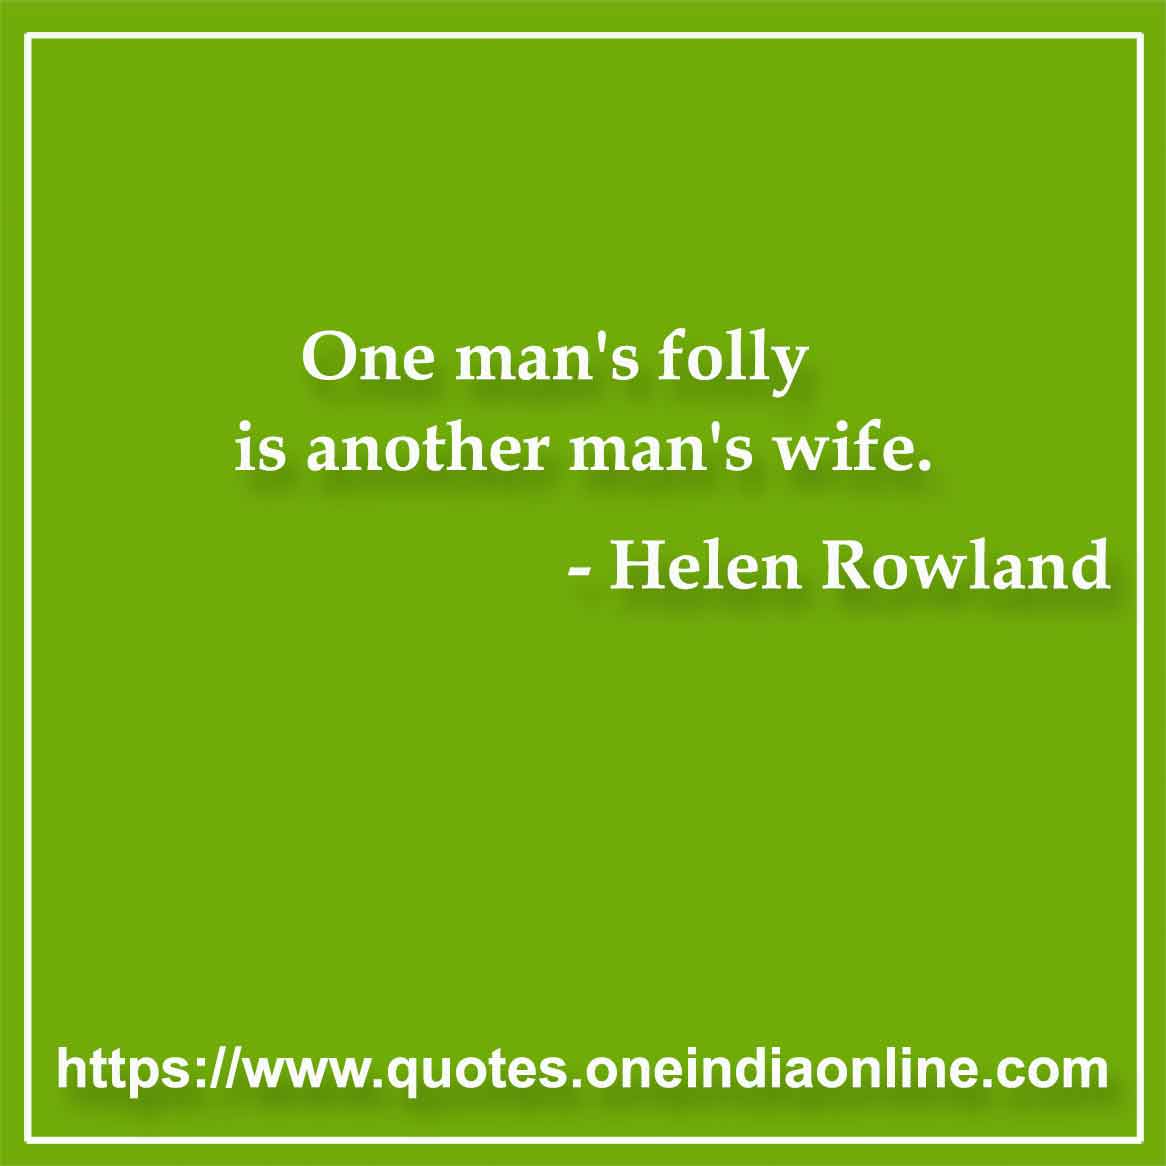 One man's folly is another man's wife.

- Helen Rowland Quotes